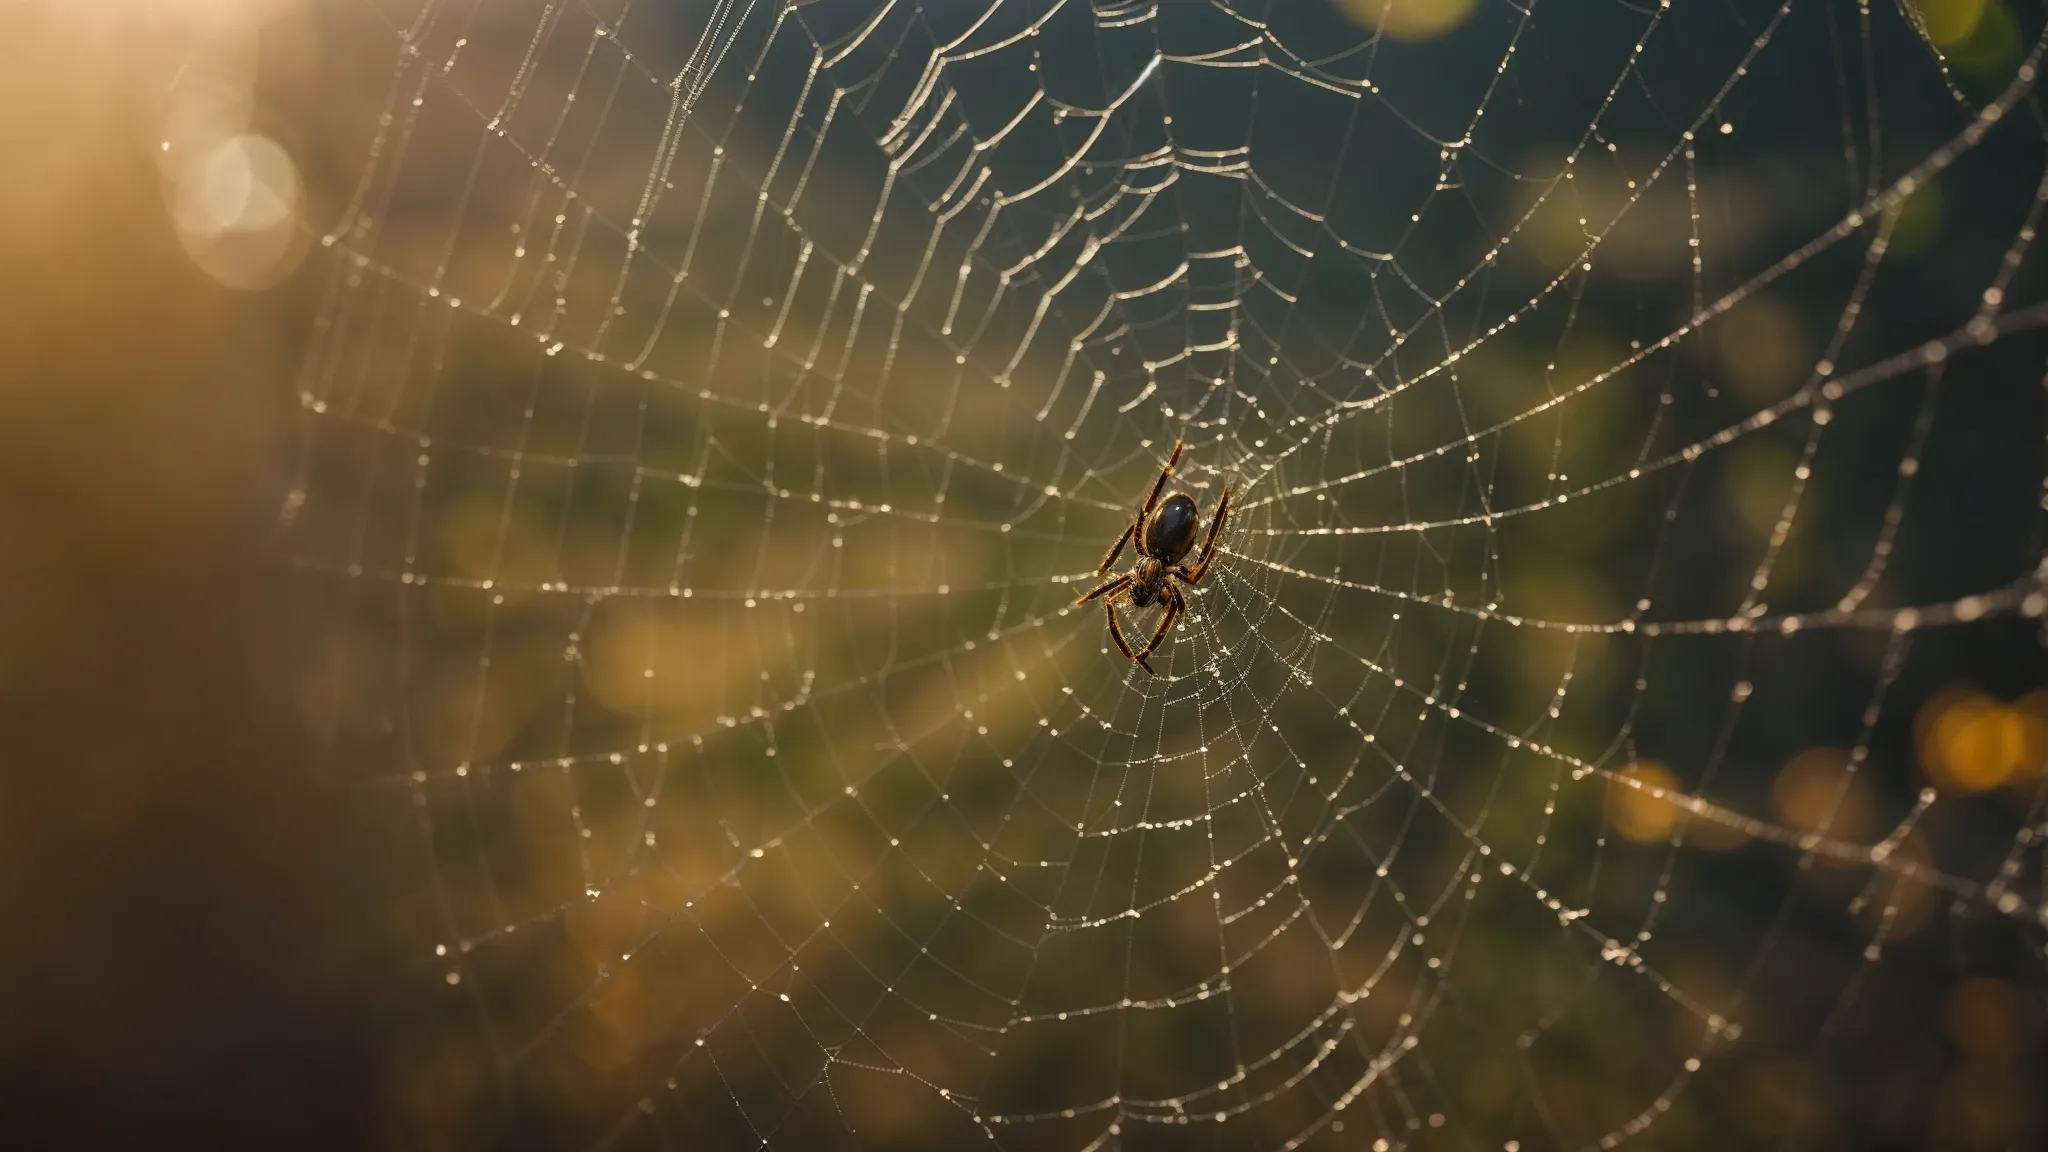 a spider methodically maneuvering through a web, symbolizing the efficient navigation of search engine crawlers on a well-structured website.